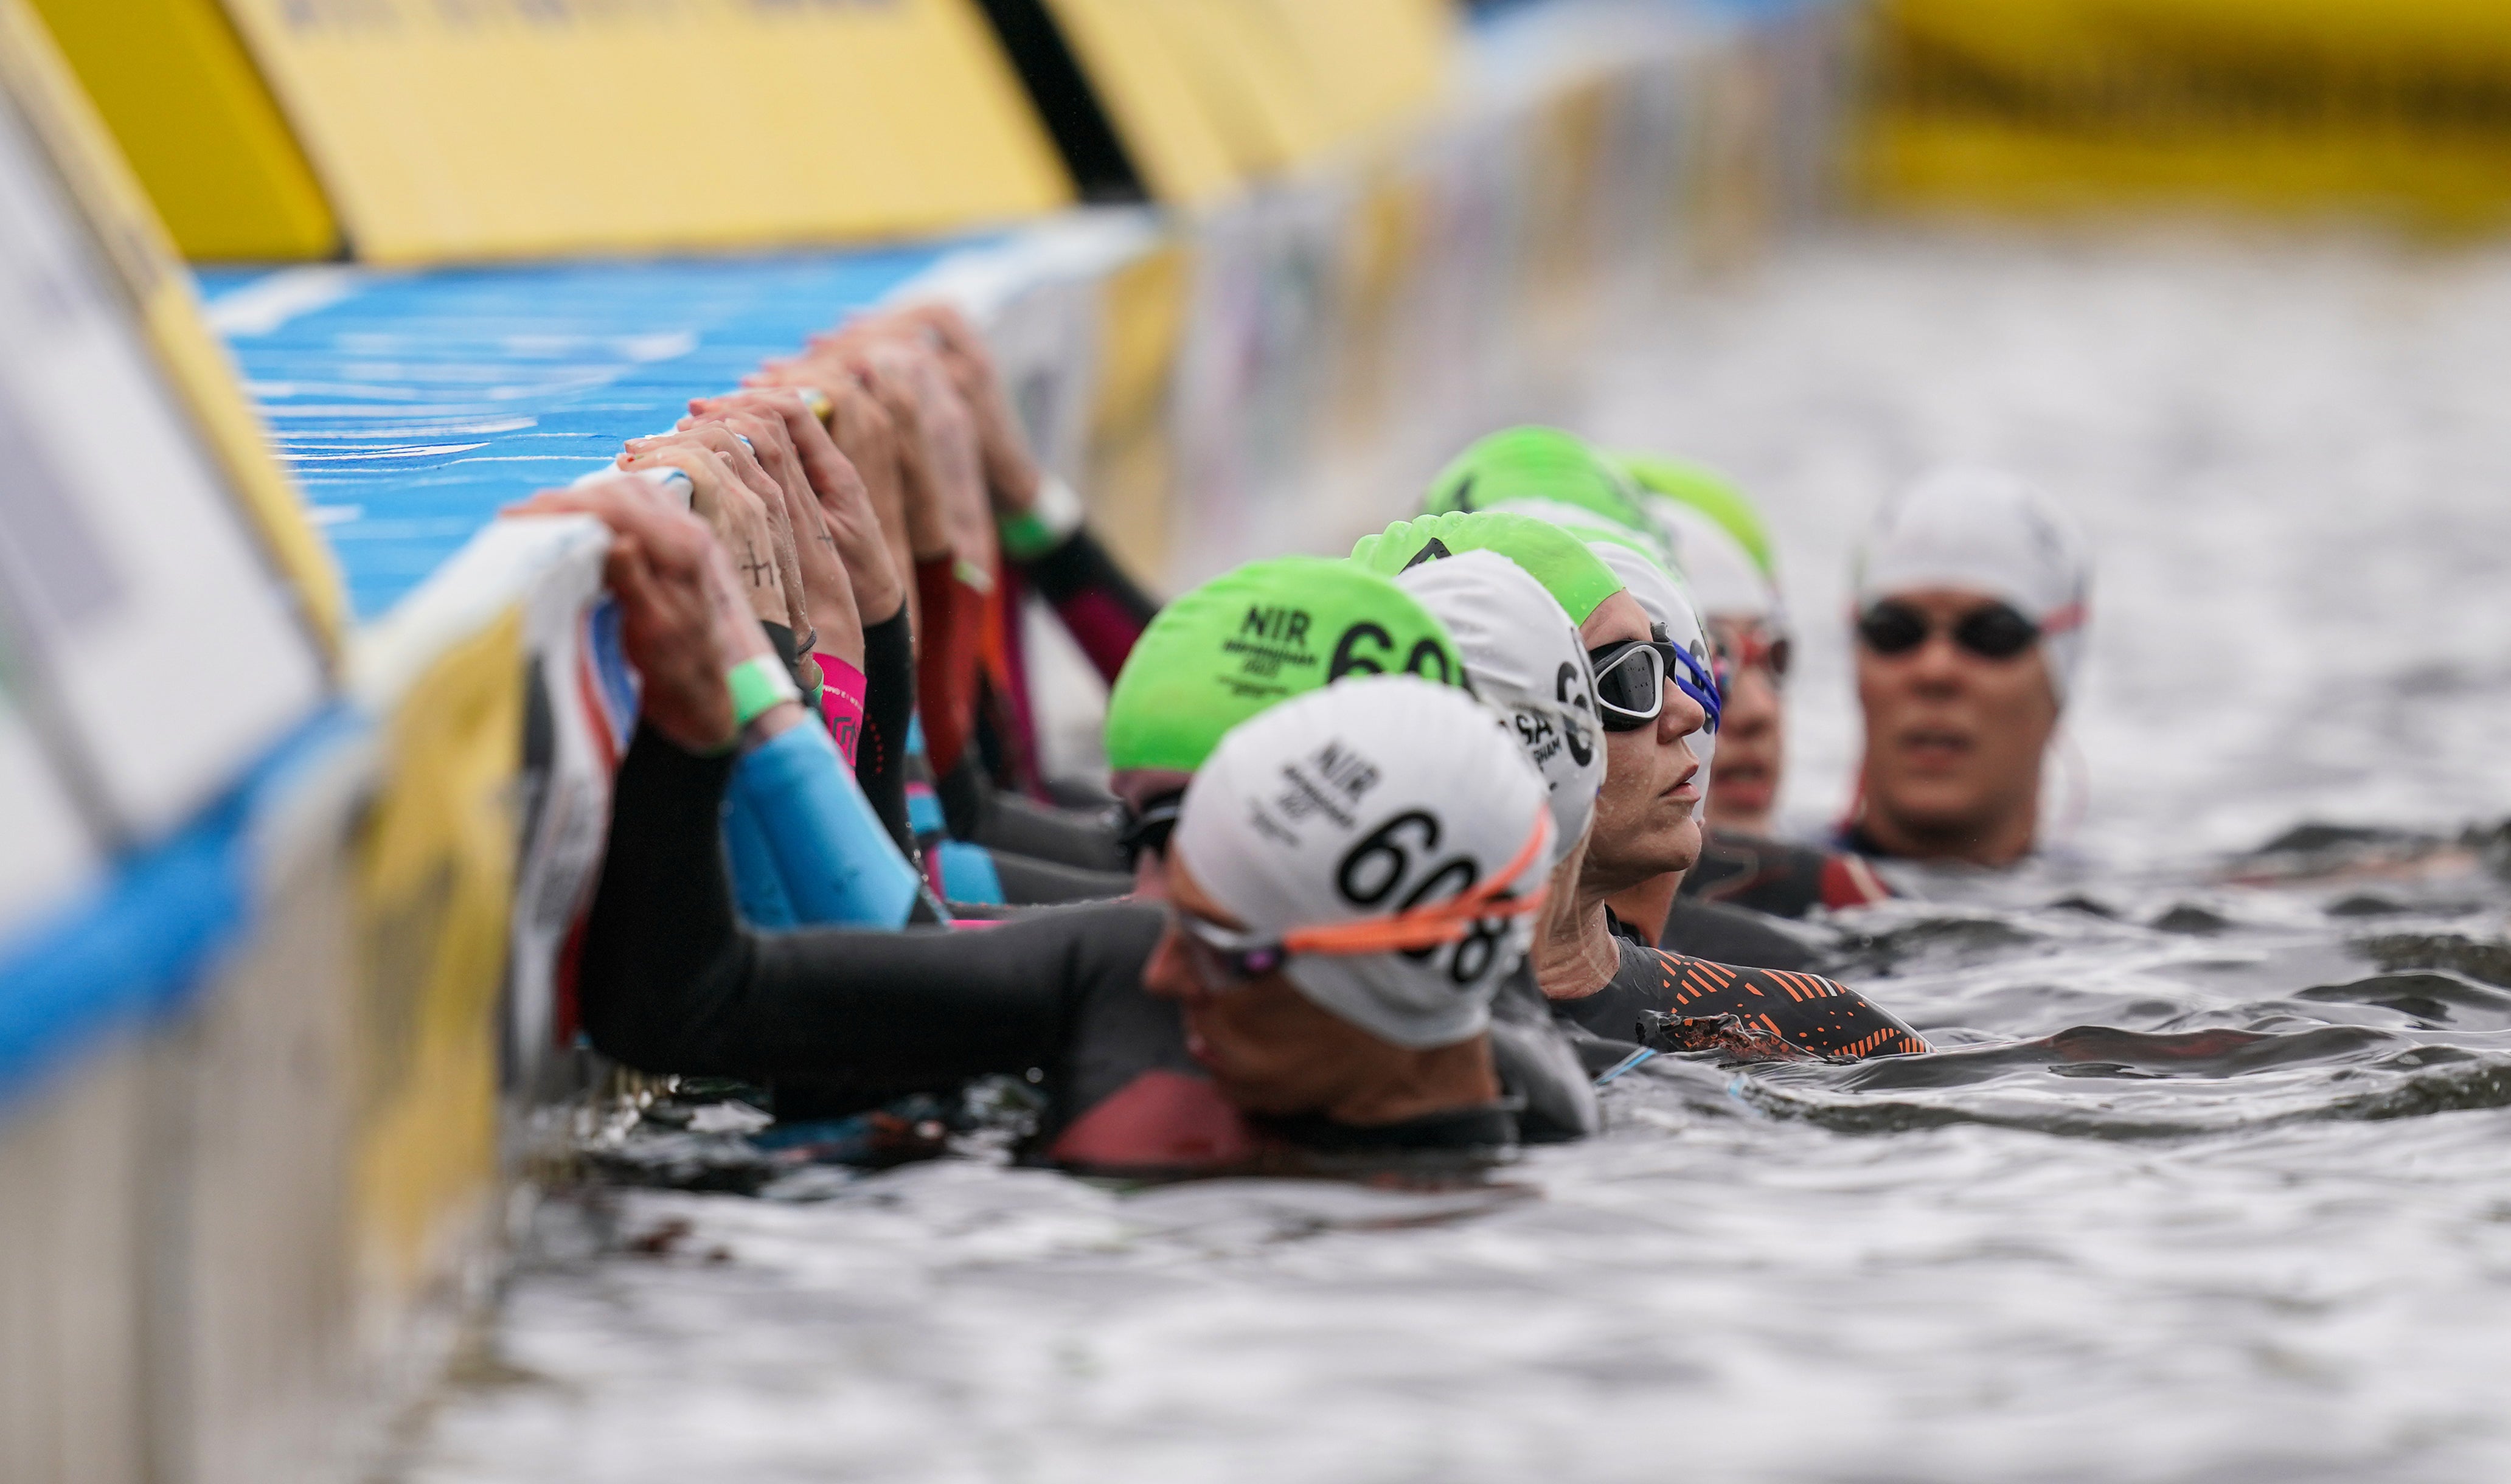 Athletes prepare for the start of the swim in the Women’s Para Triathlon on day three of the 2022 Commonwealth Games in Birmingham (David Davies/PA)